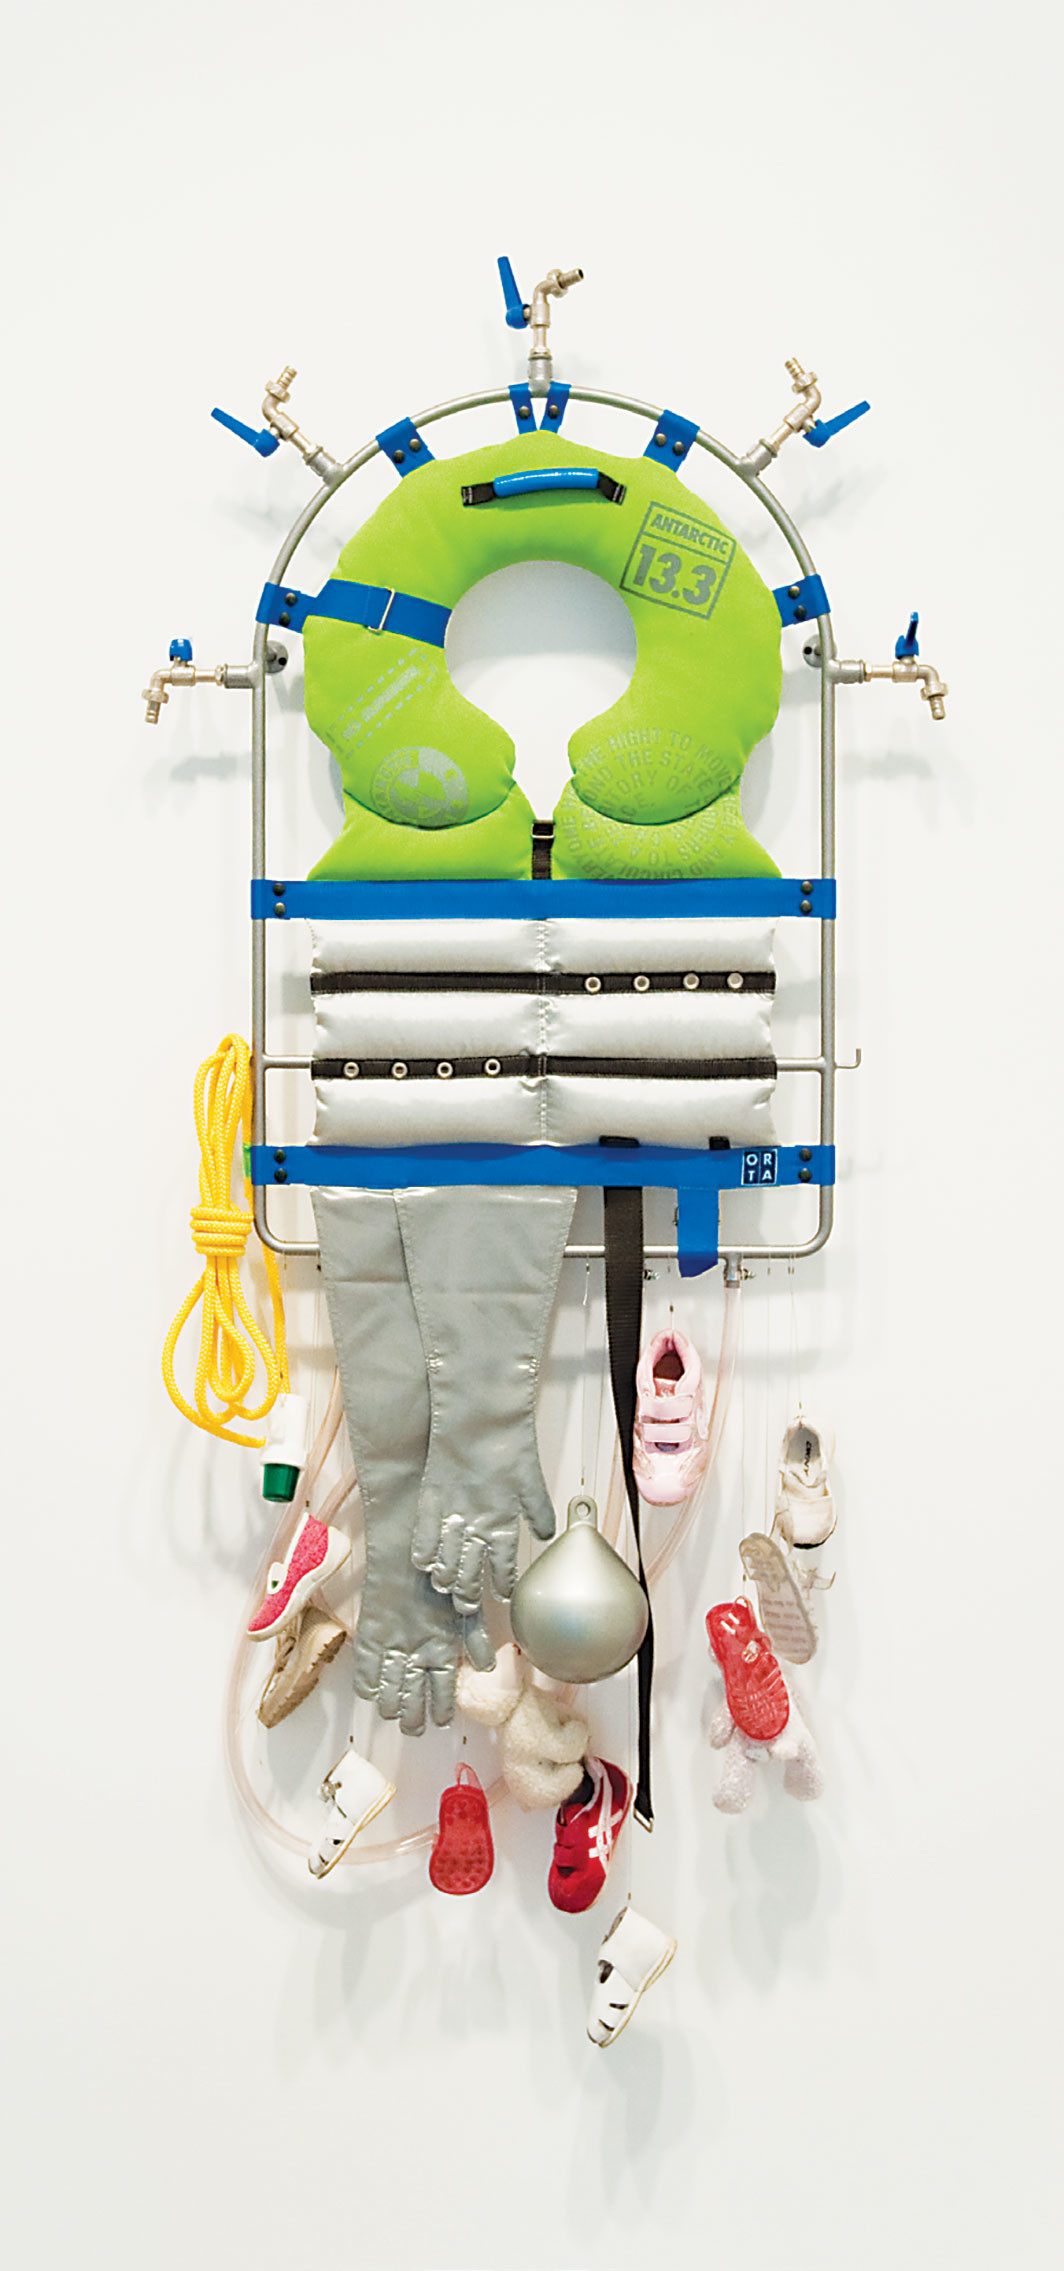 Lucy and Jorge Orta, Life Line – Survival Kit, 2008, steel frame, piping, taps, textiles, silk screen on fabric, webbing, shoes, float, warning light, rope, 59 × 31 1⁄2 × 5 7⁄8". Courtesy the artist and Jane Lombard Gallery